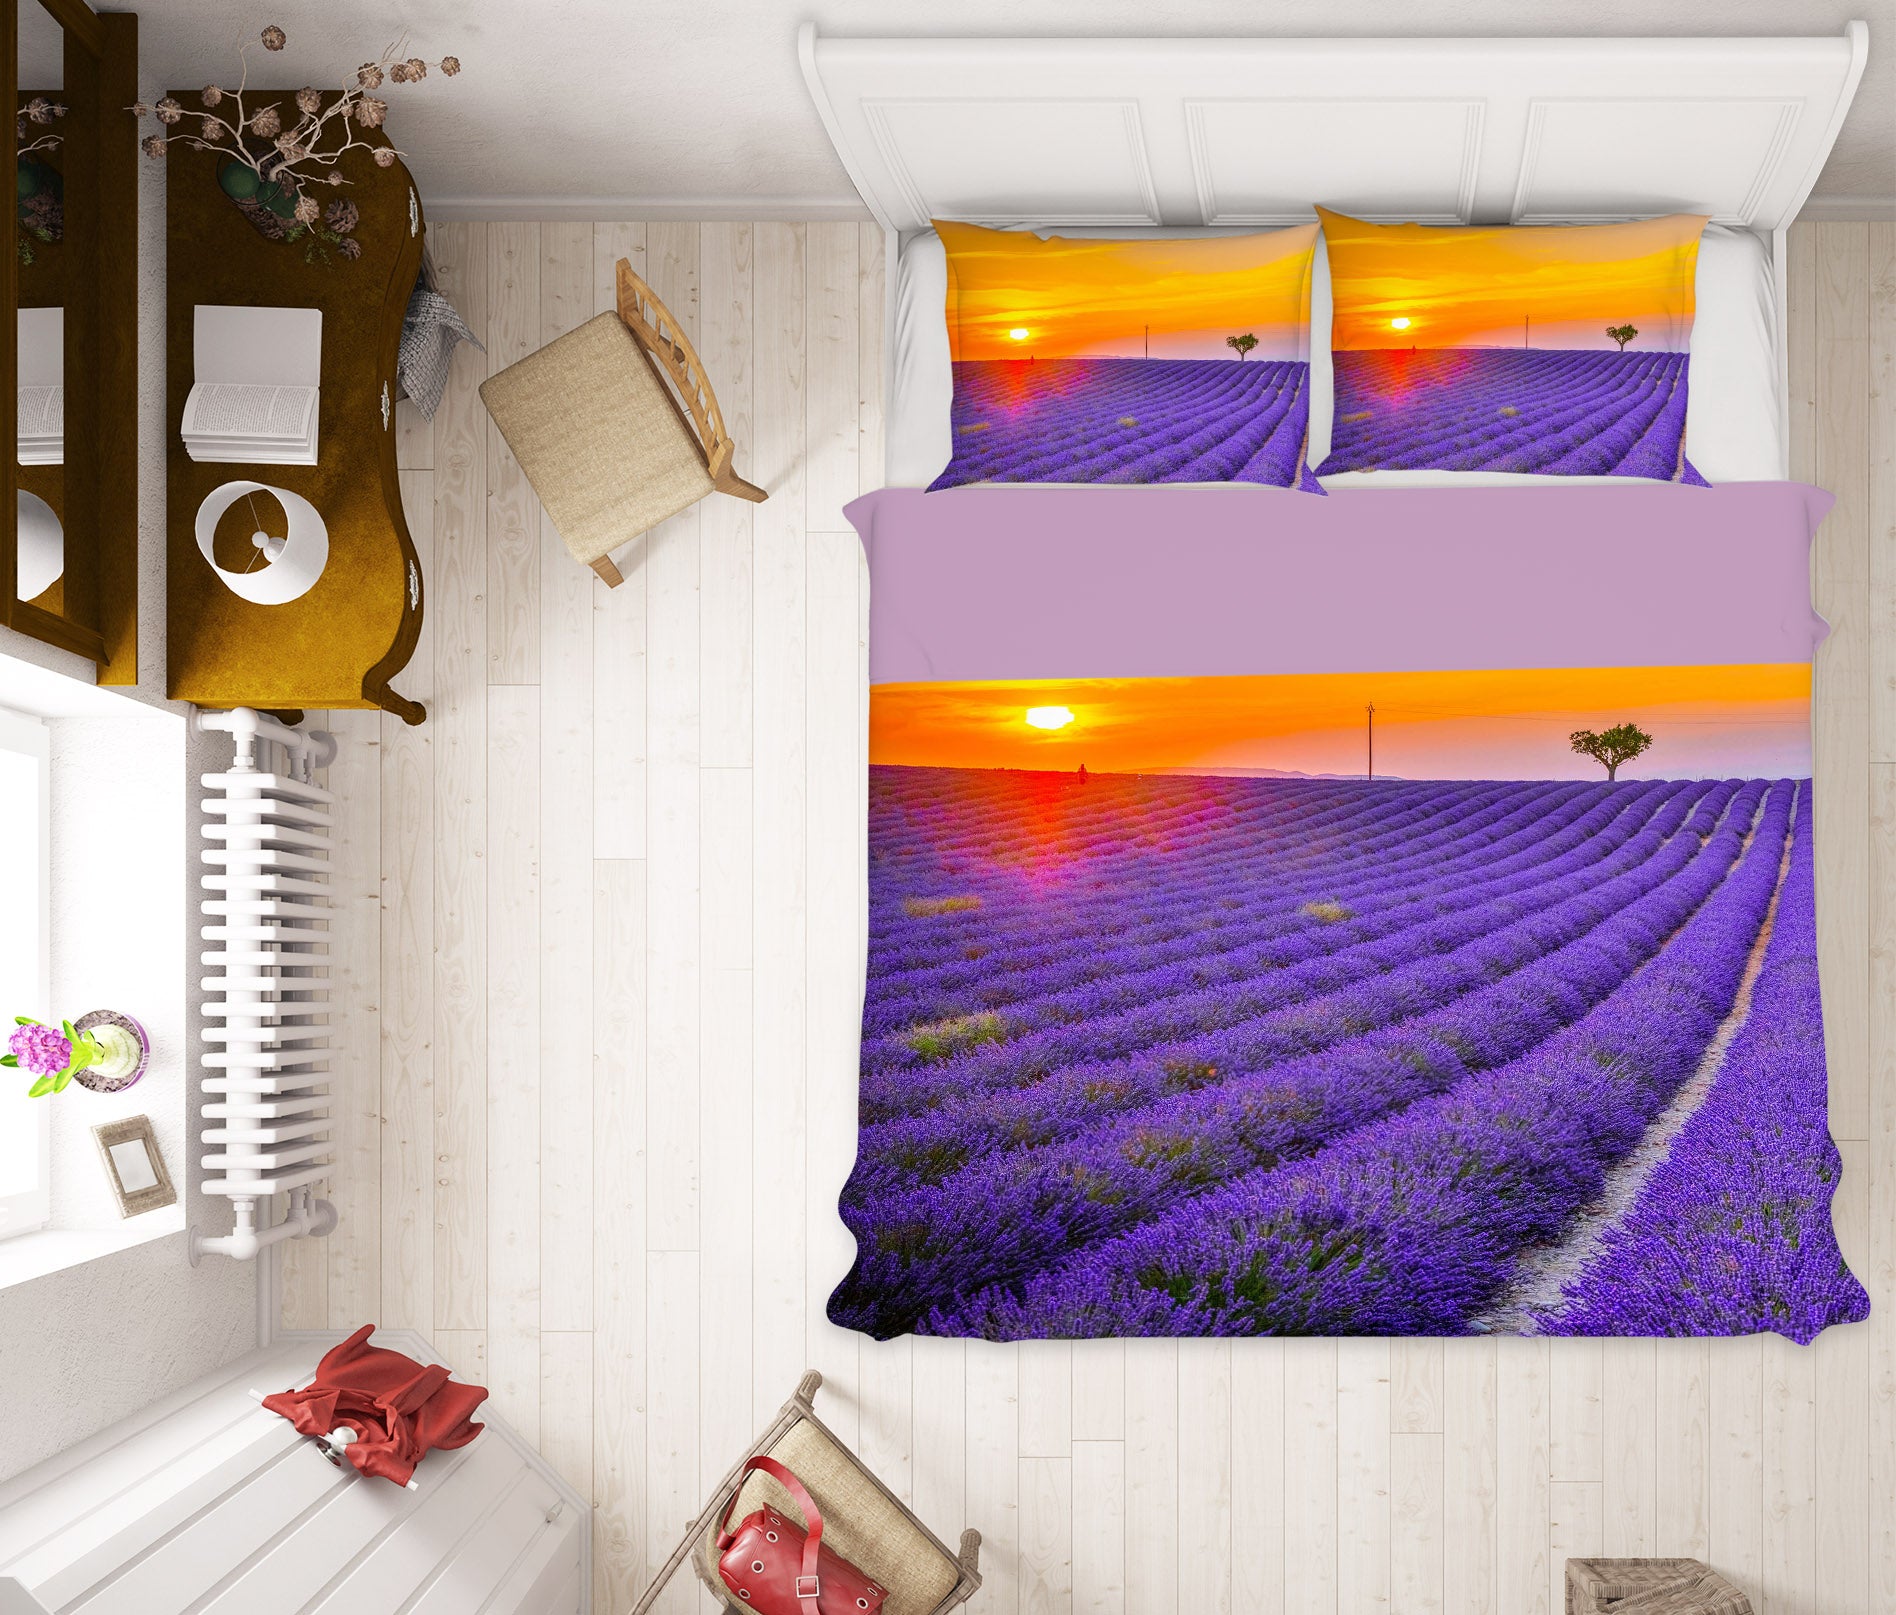 3D Valensole Lavender 165 Marco Carmassi Bedding Bed Pillowcases Quilt